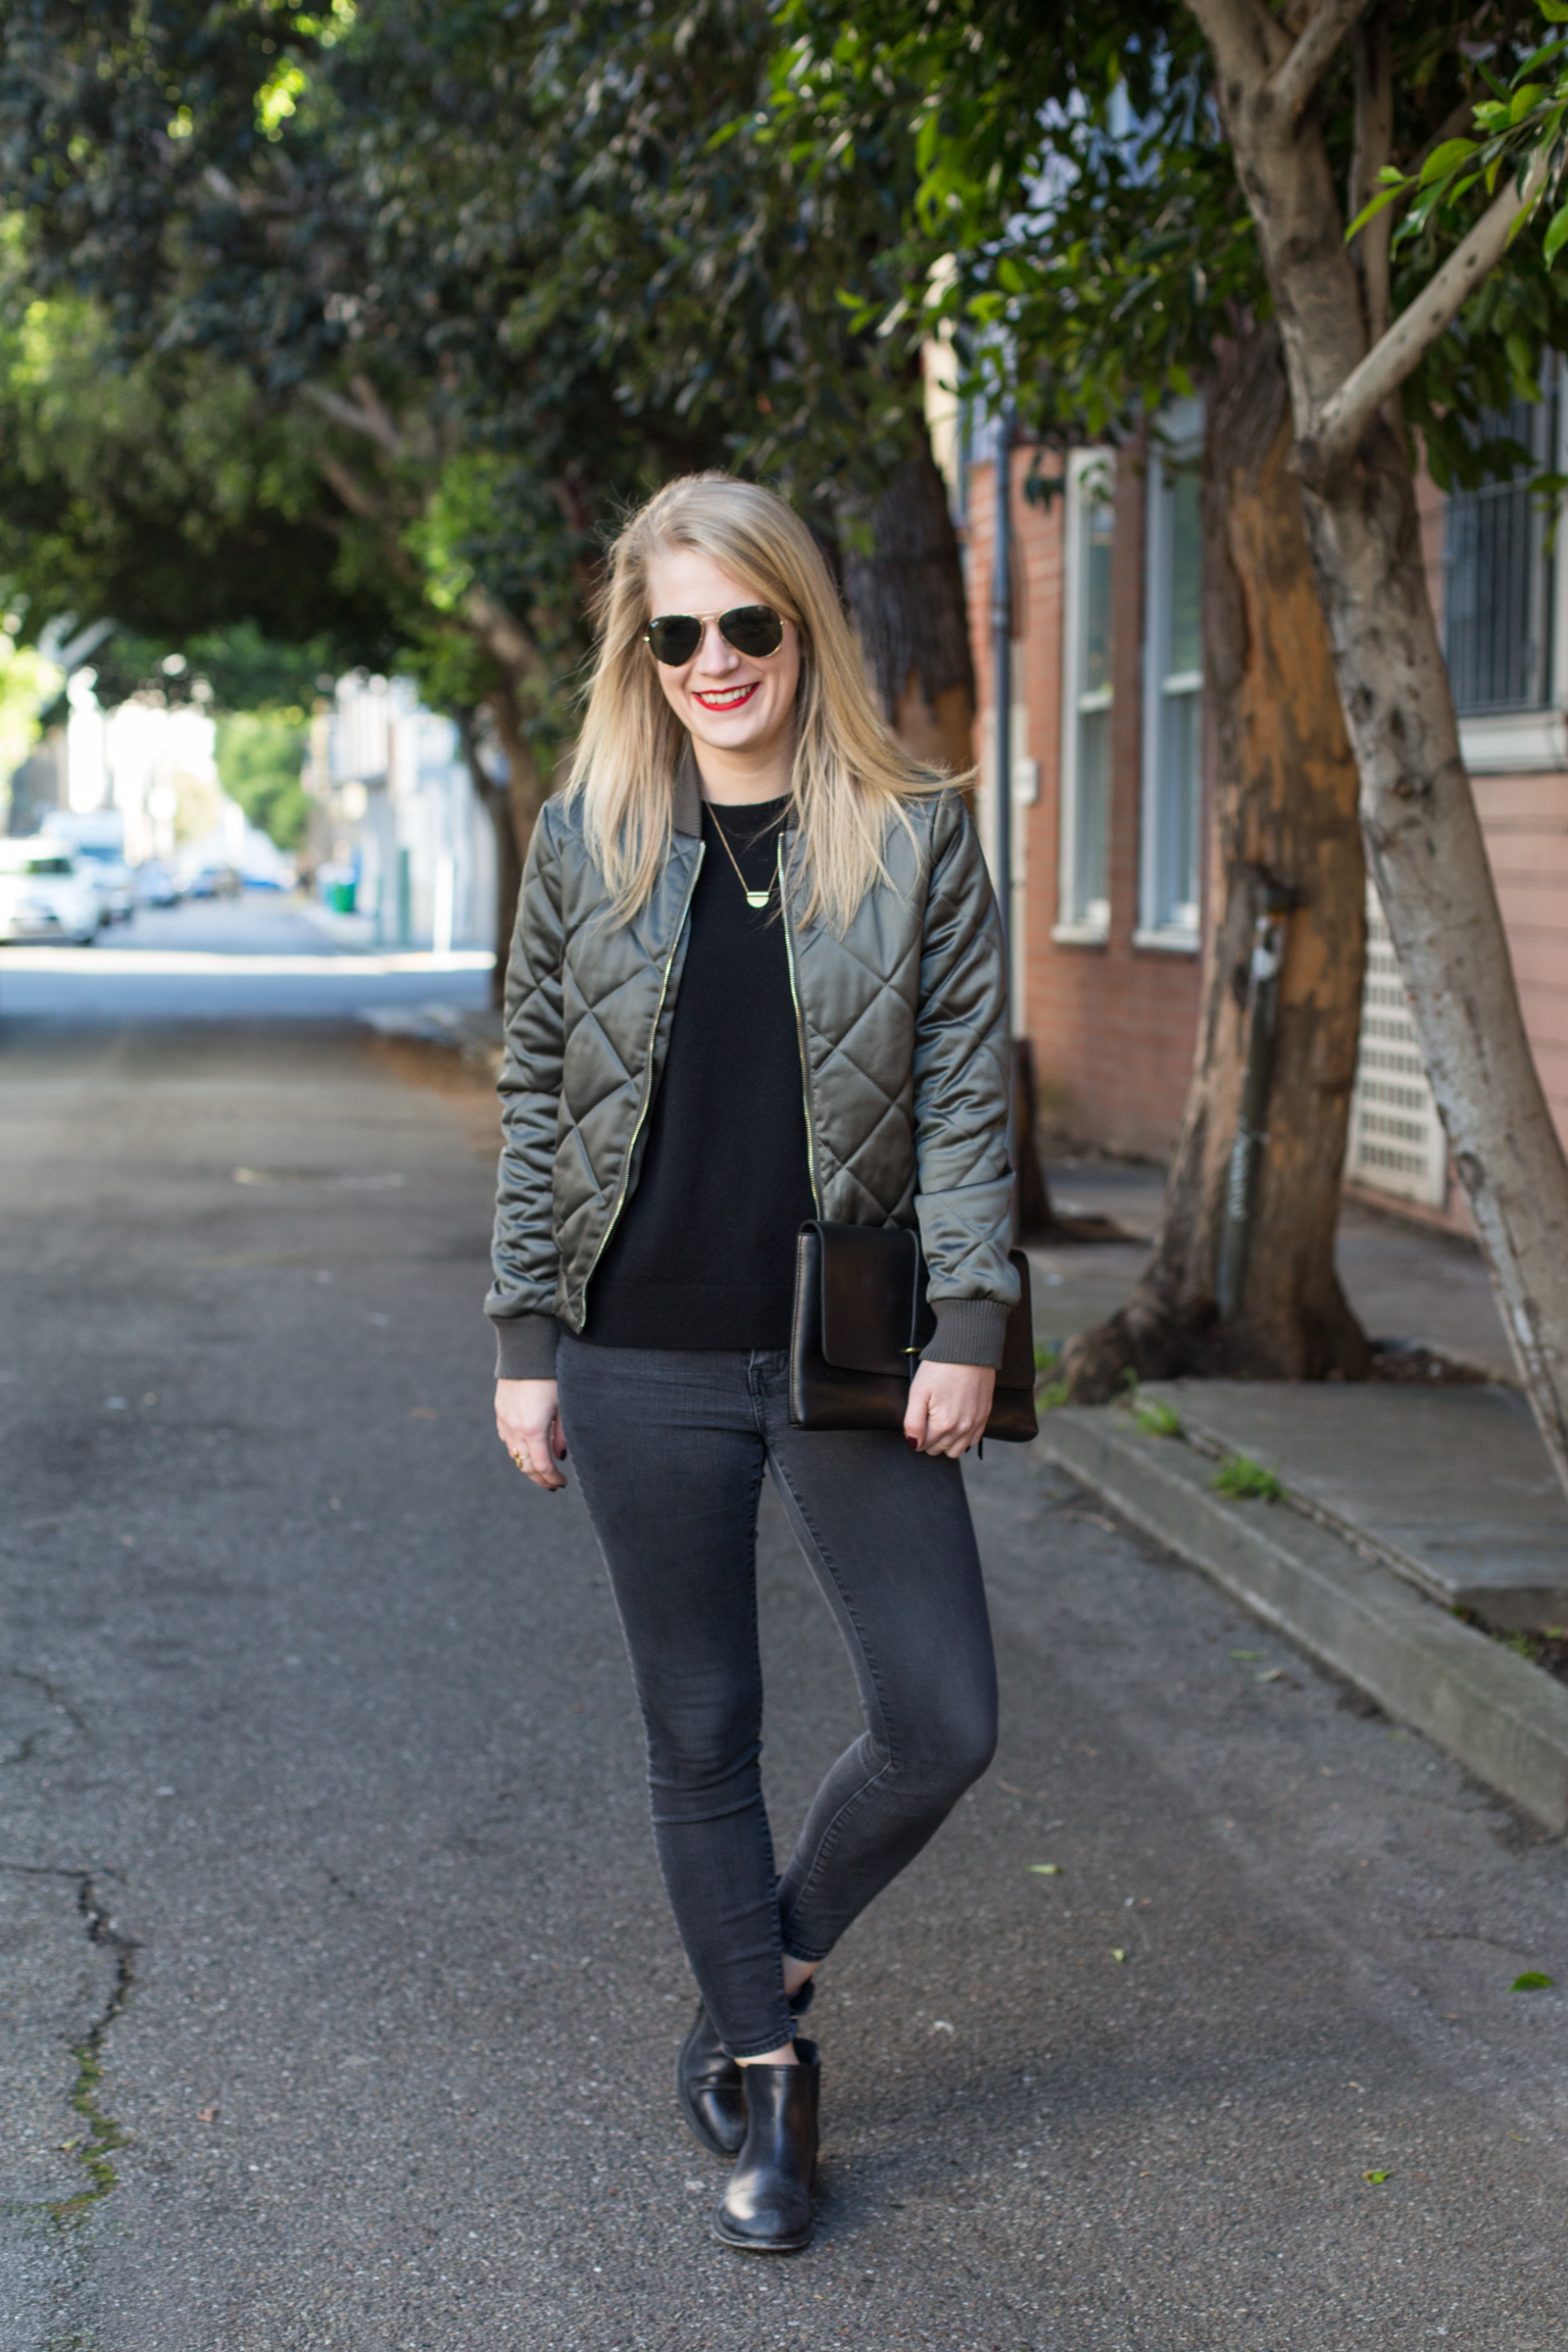 All Black Everything with Black Everlane Sweater, Madewell Jeans and Johnston & Murphy Chelsea Boots.